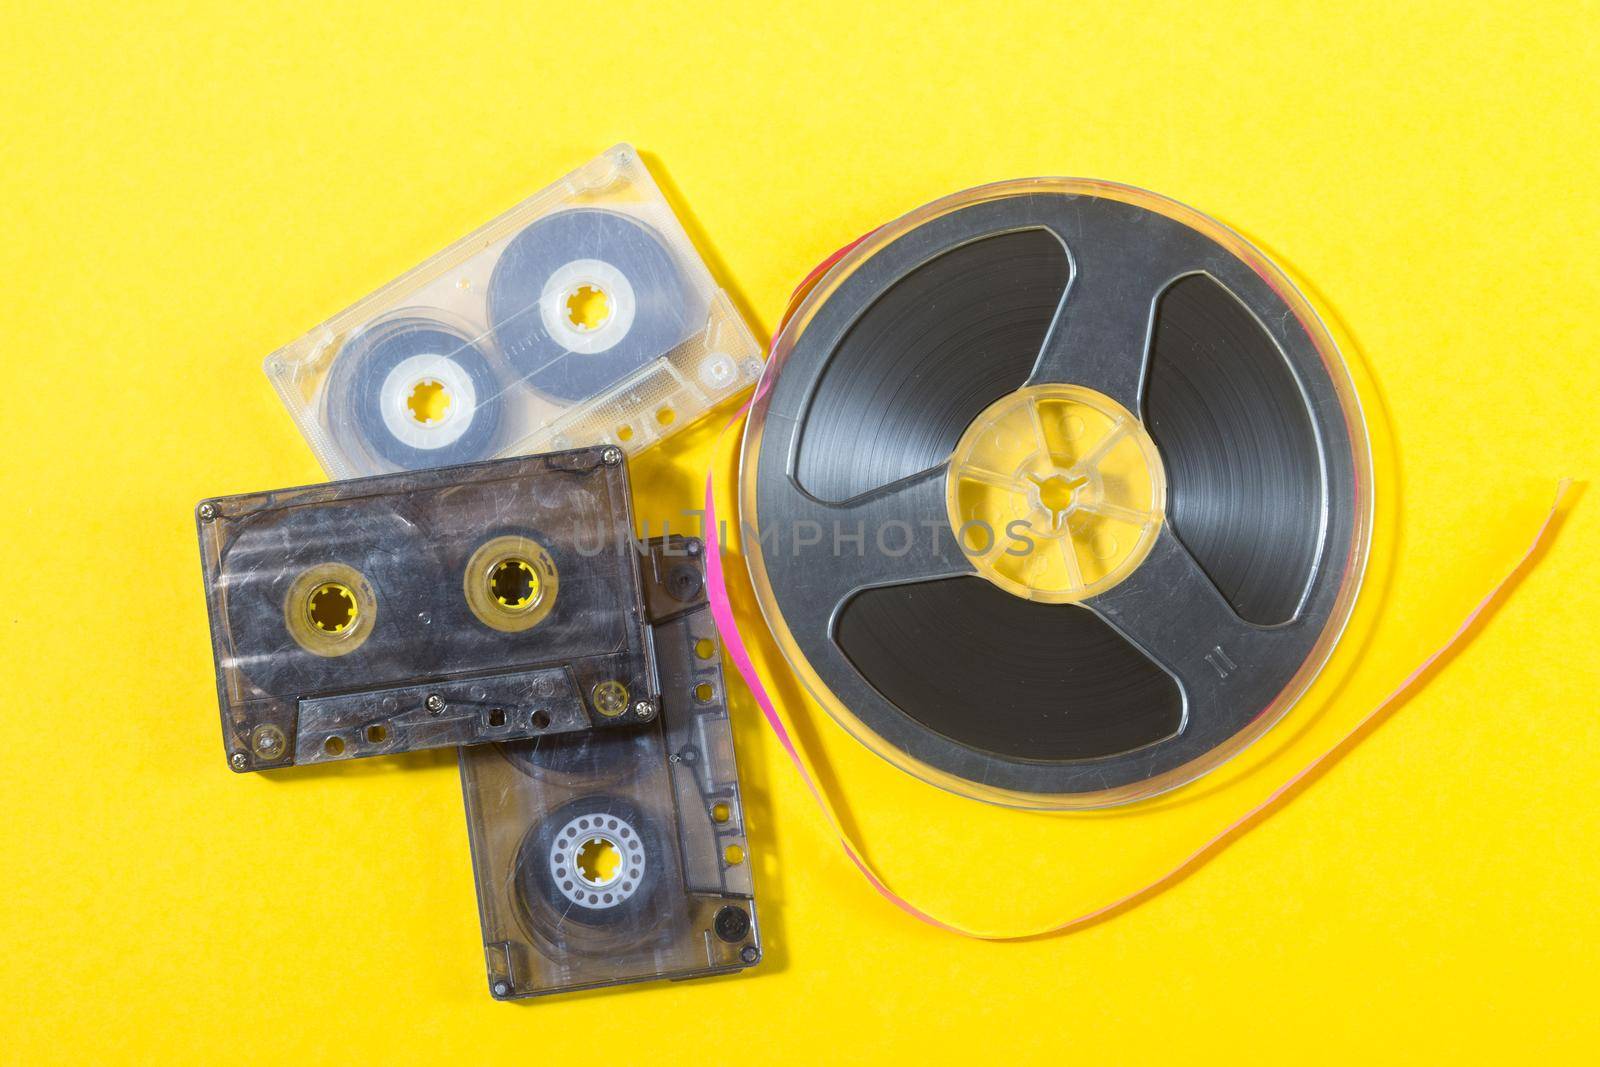 retro audio compact cassettes and reel to reel tape on a yellow background